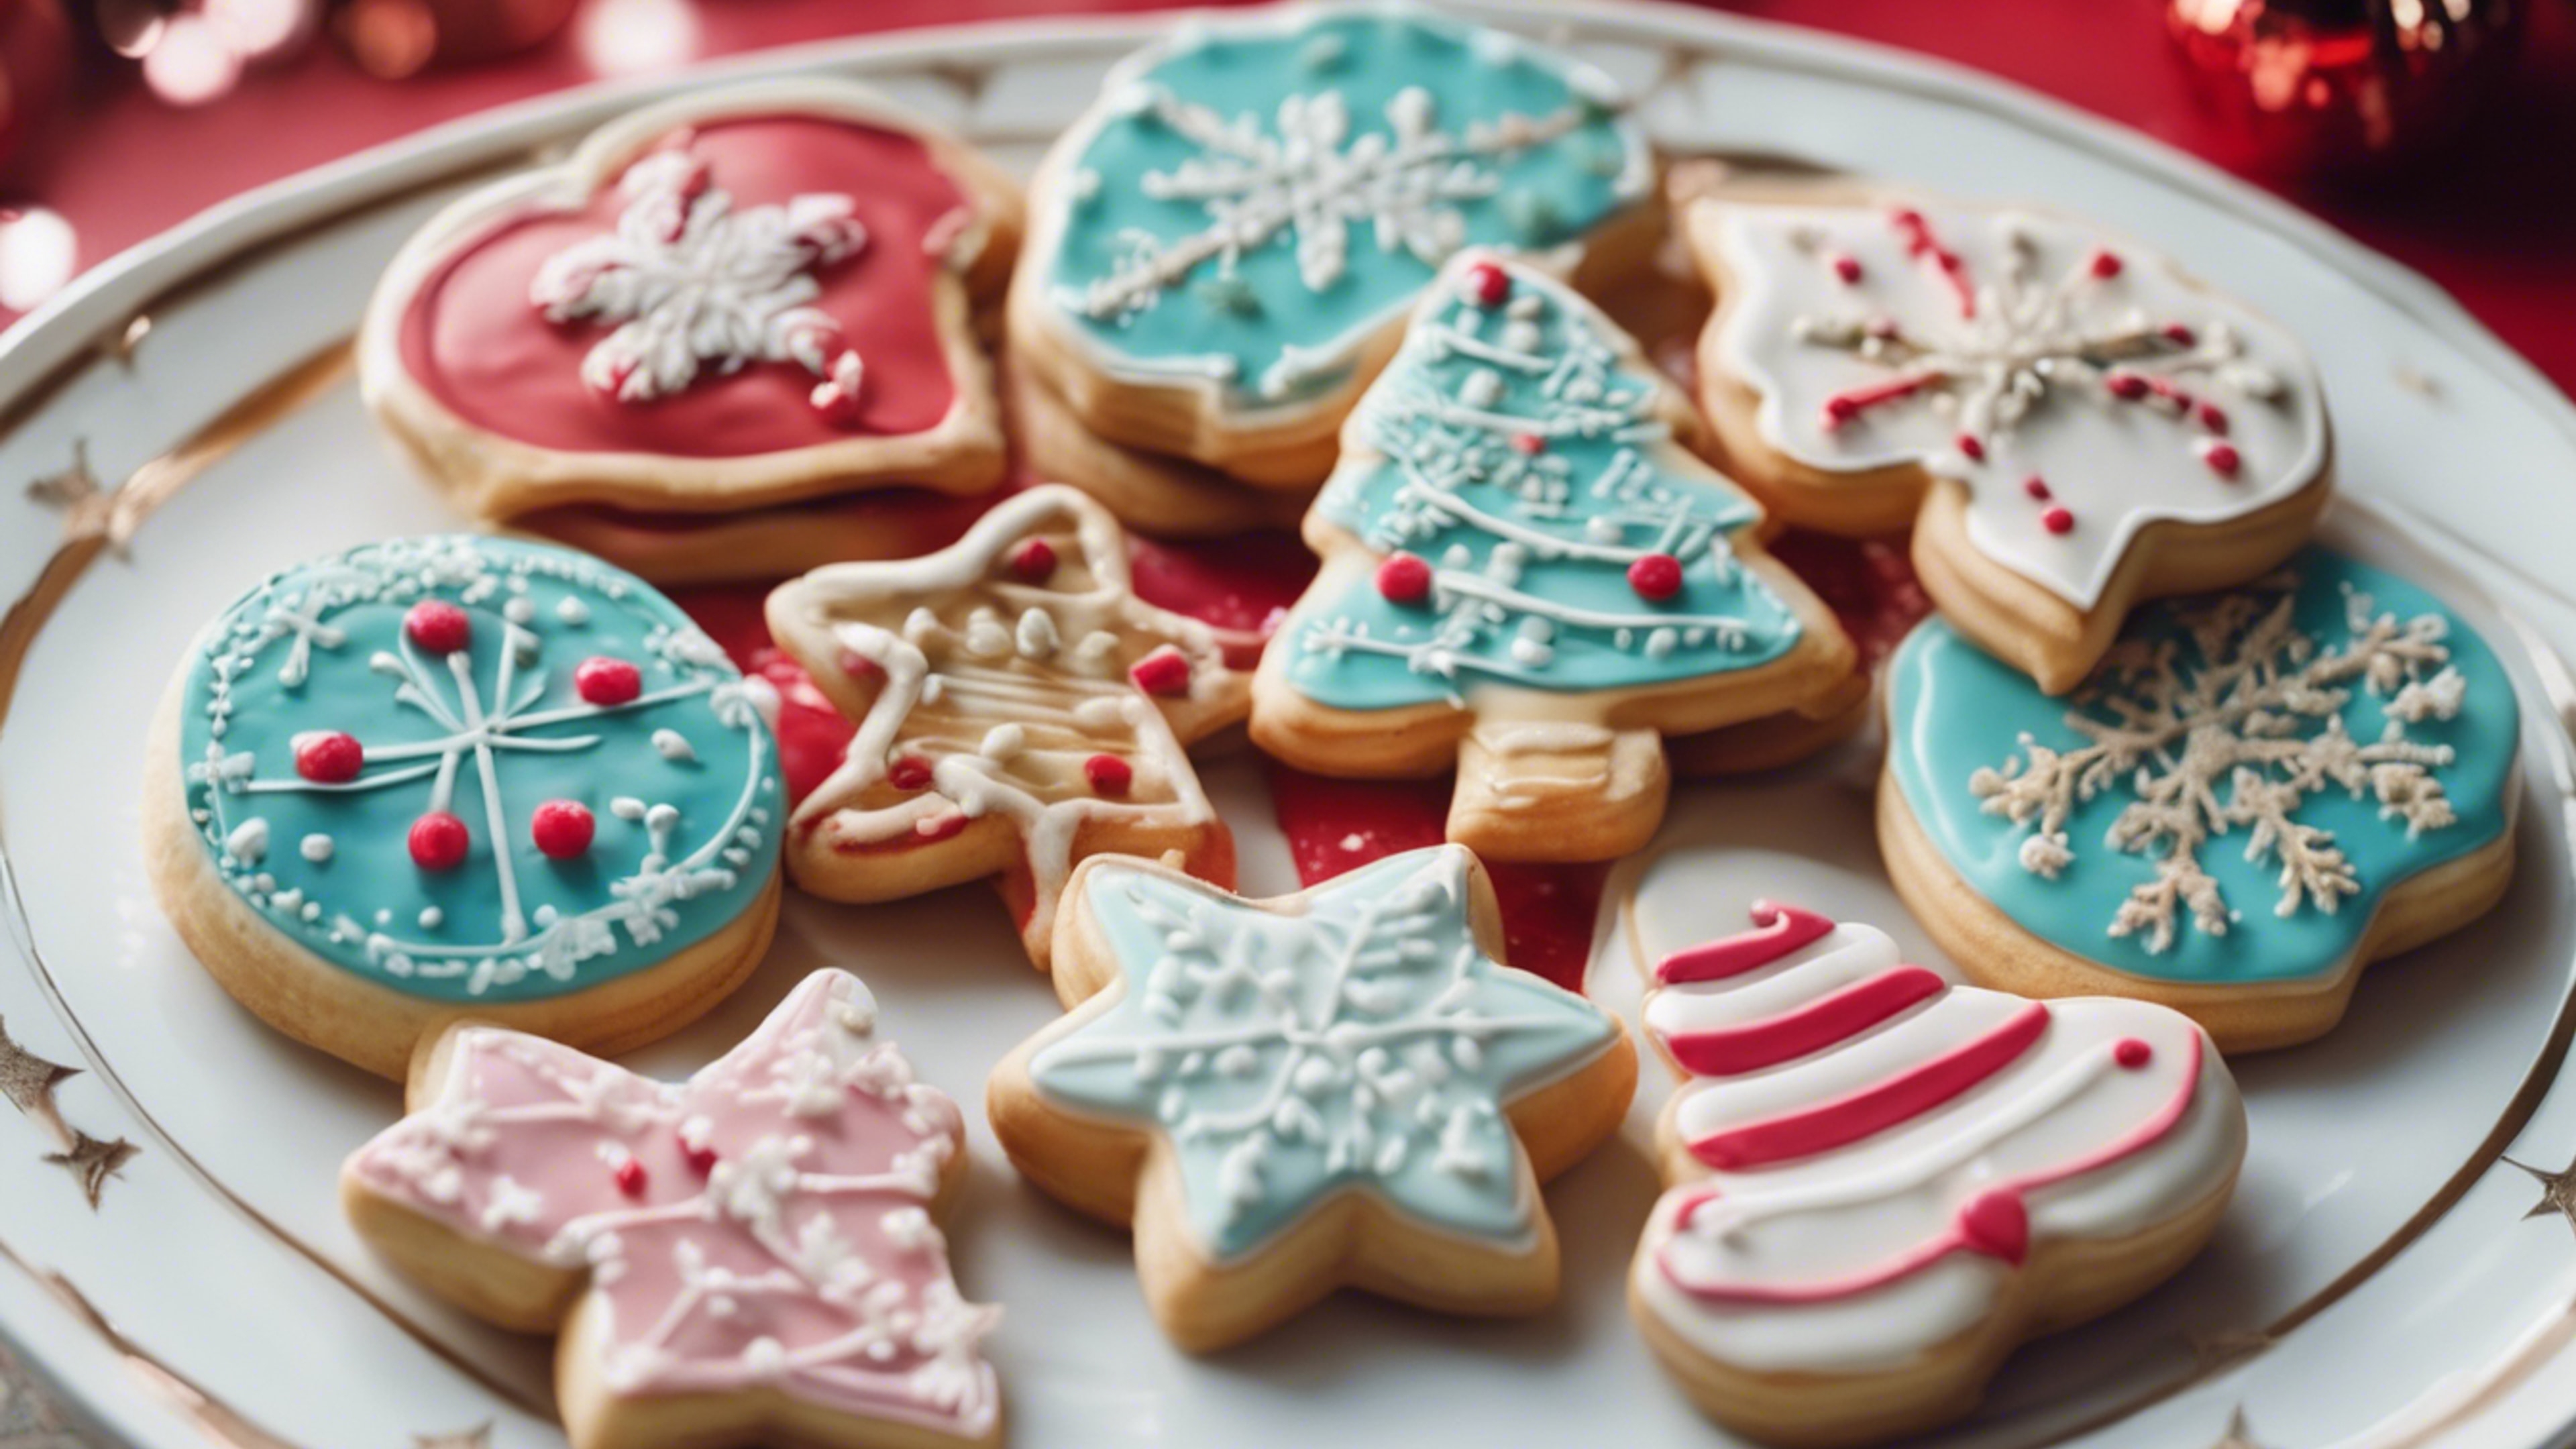 A tasty-looking illustration of sweet kawaii-themed Christmas cookies arranged neatly on a festive, porcelain plate. Валлпапер[b21cd1ddce3842908f01]